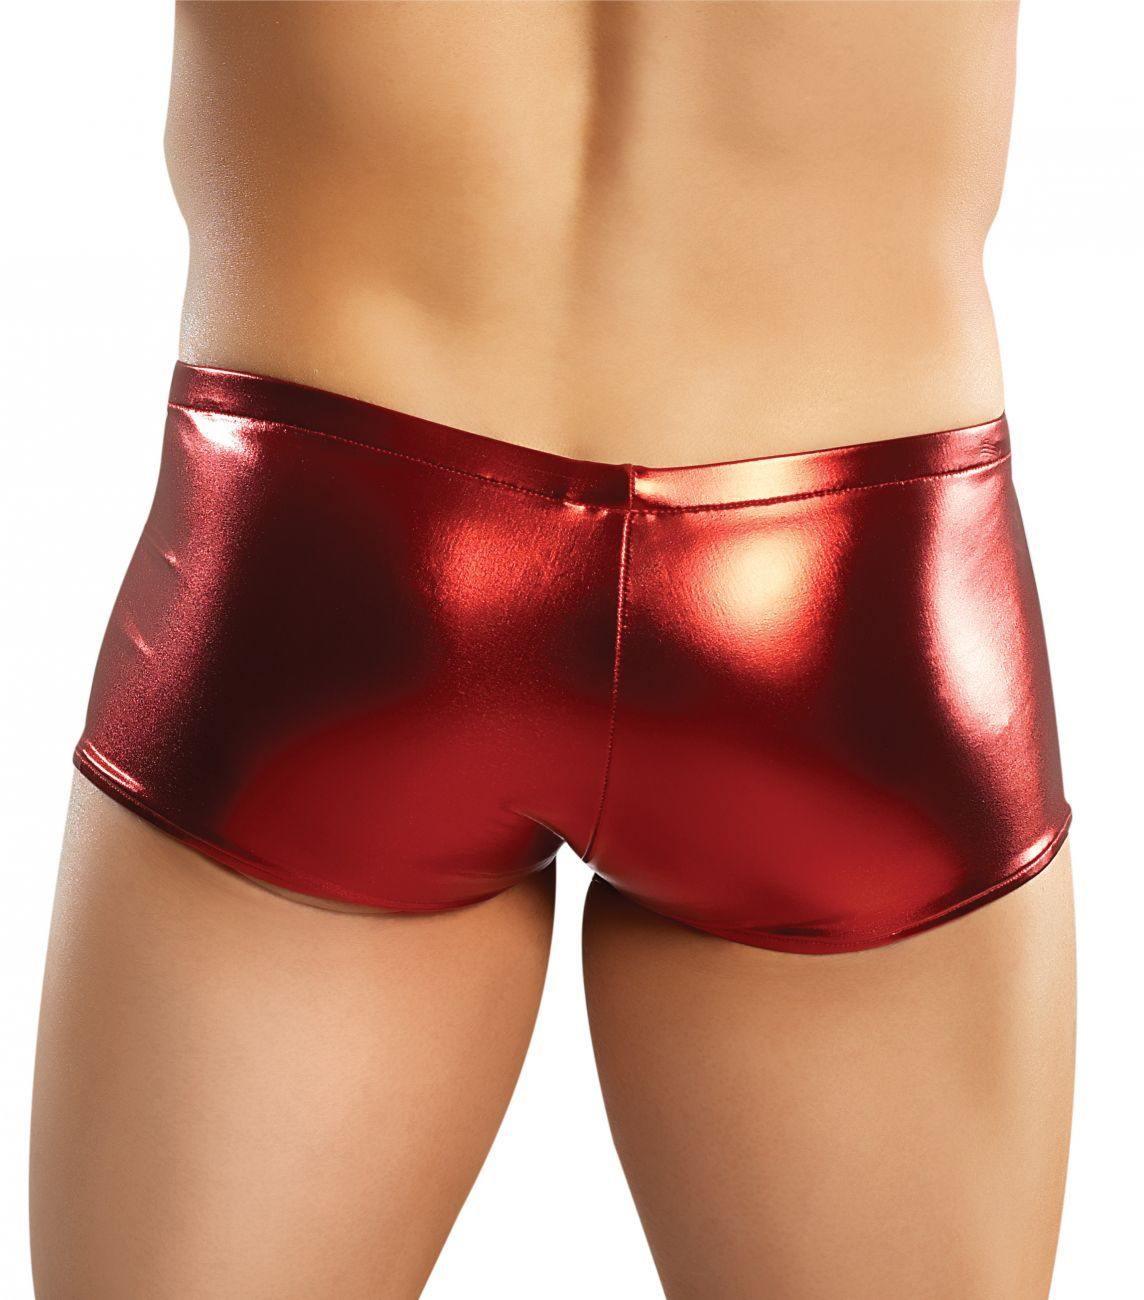 image of product,Heavy Metal Mini Short Boxer Briefs - SEXYEONE